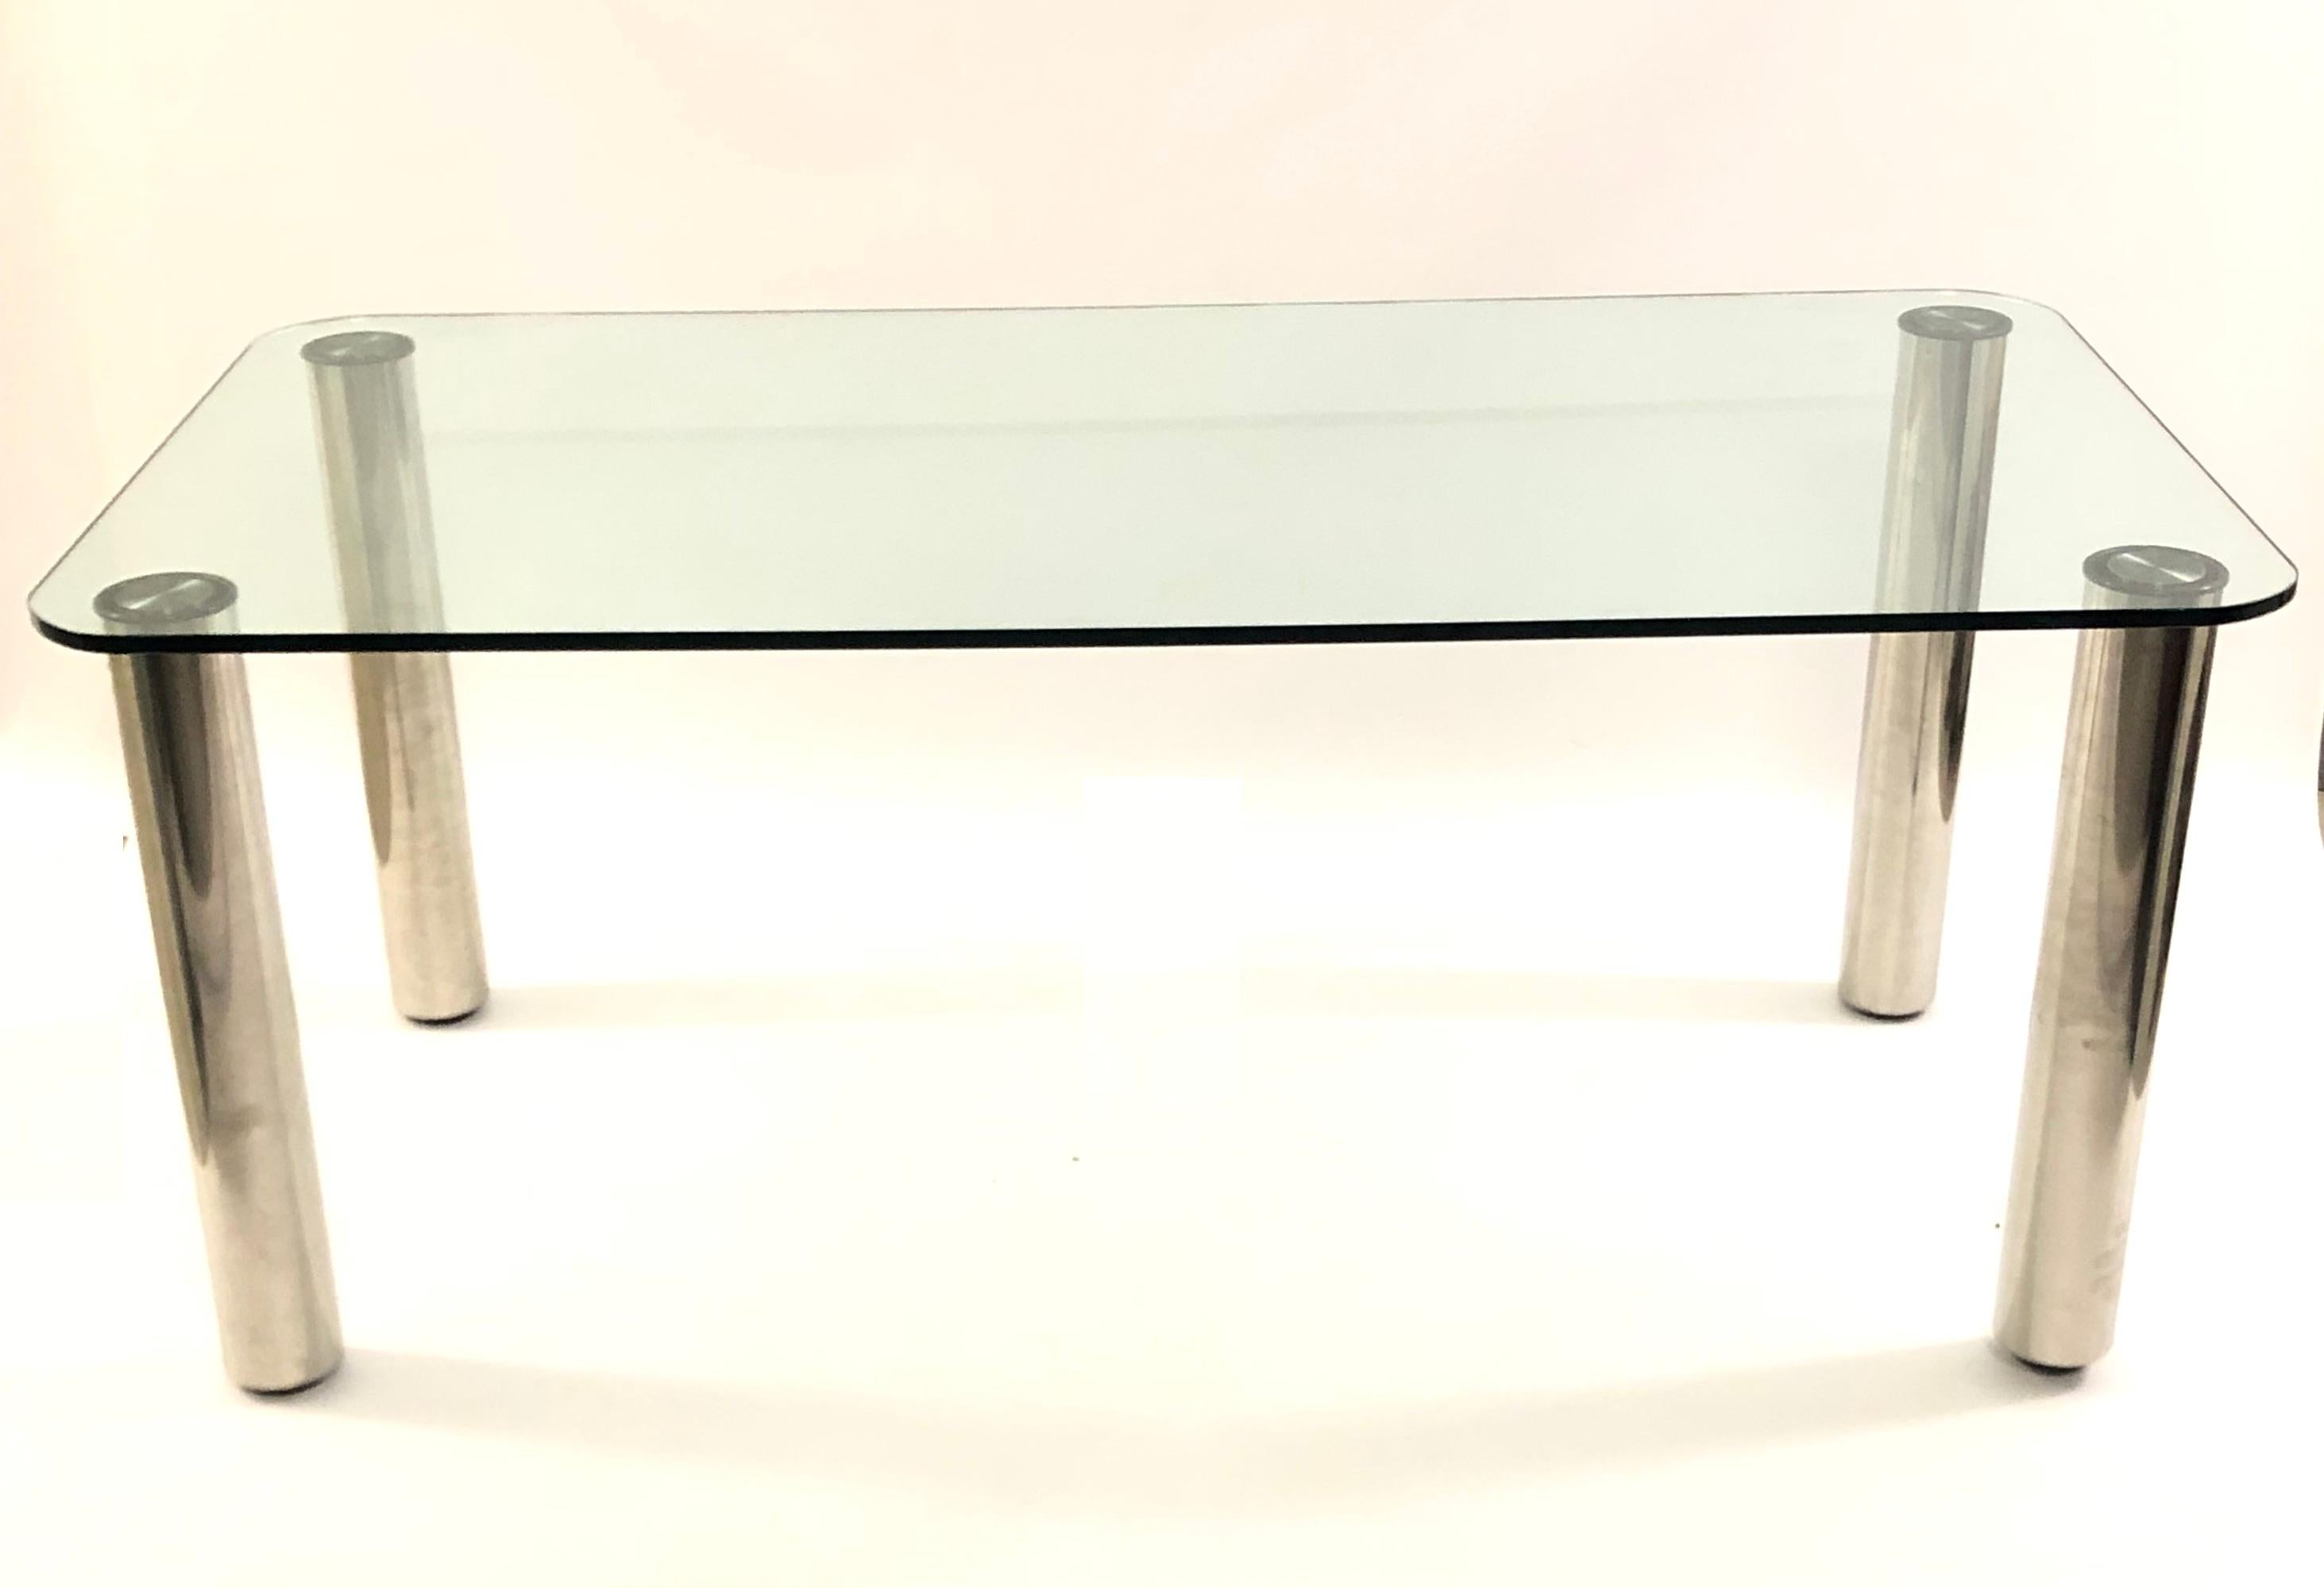 Italian 1970s glass dining table having a slightly tinted, thick glass top with rounded corners, on chrome legs

The legs are detachable for ease of transport.

Bearing 'Made in Italy' mark to steel mount on glass top.